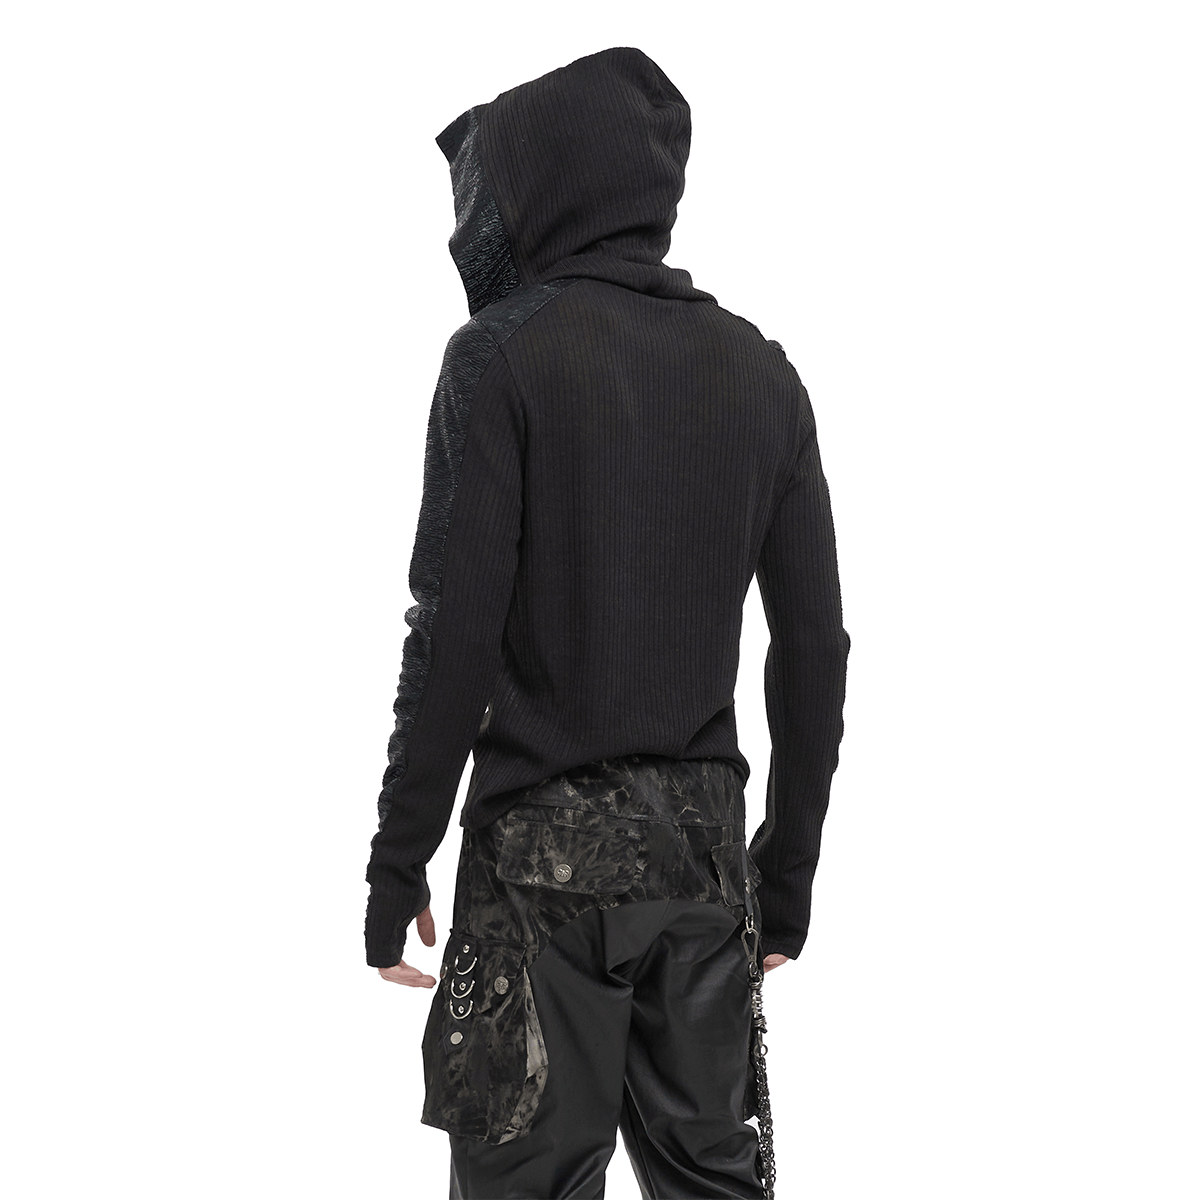 Fashion Black Hoodie with Lace-up Neckline for Men / Gothic Male Long Sleeves Hoodies